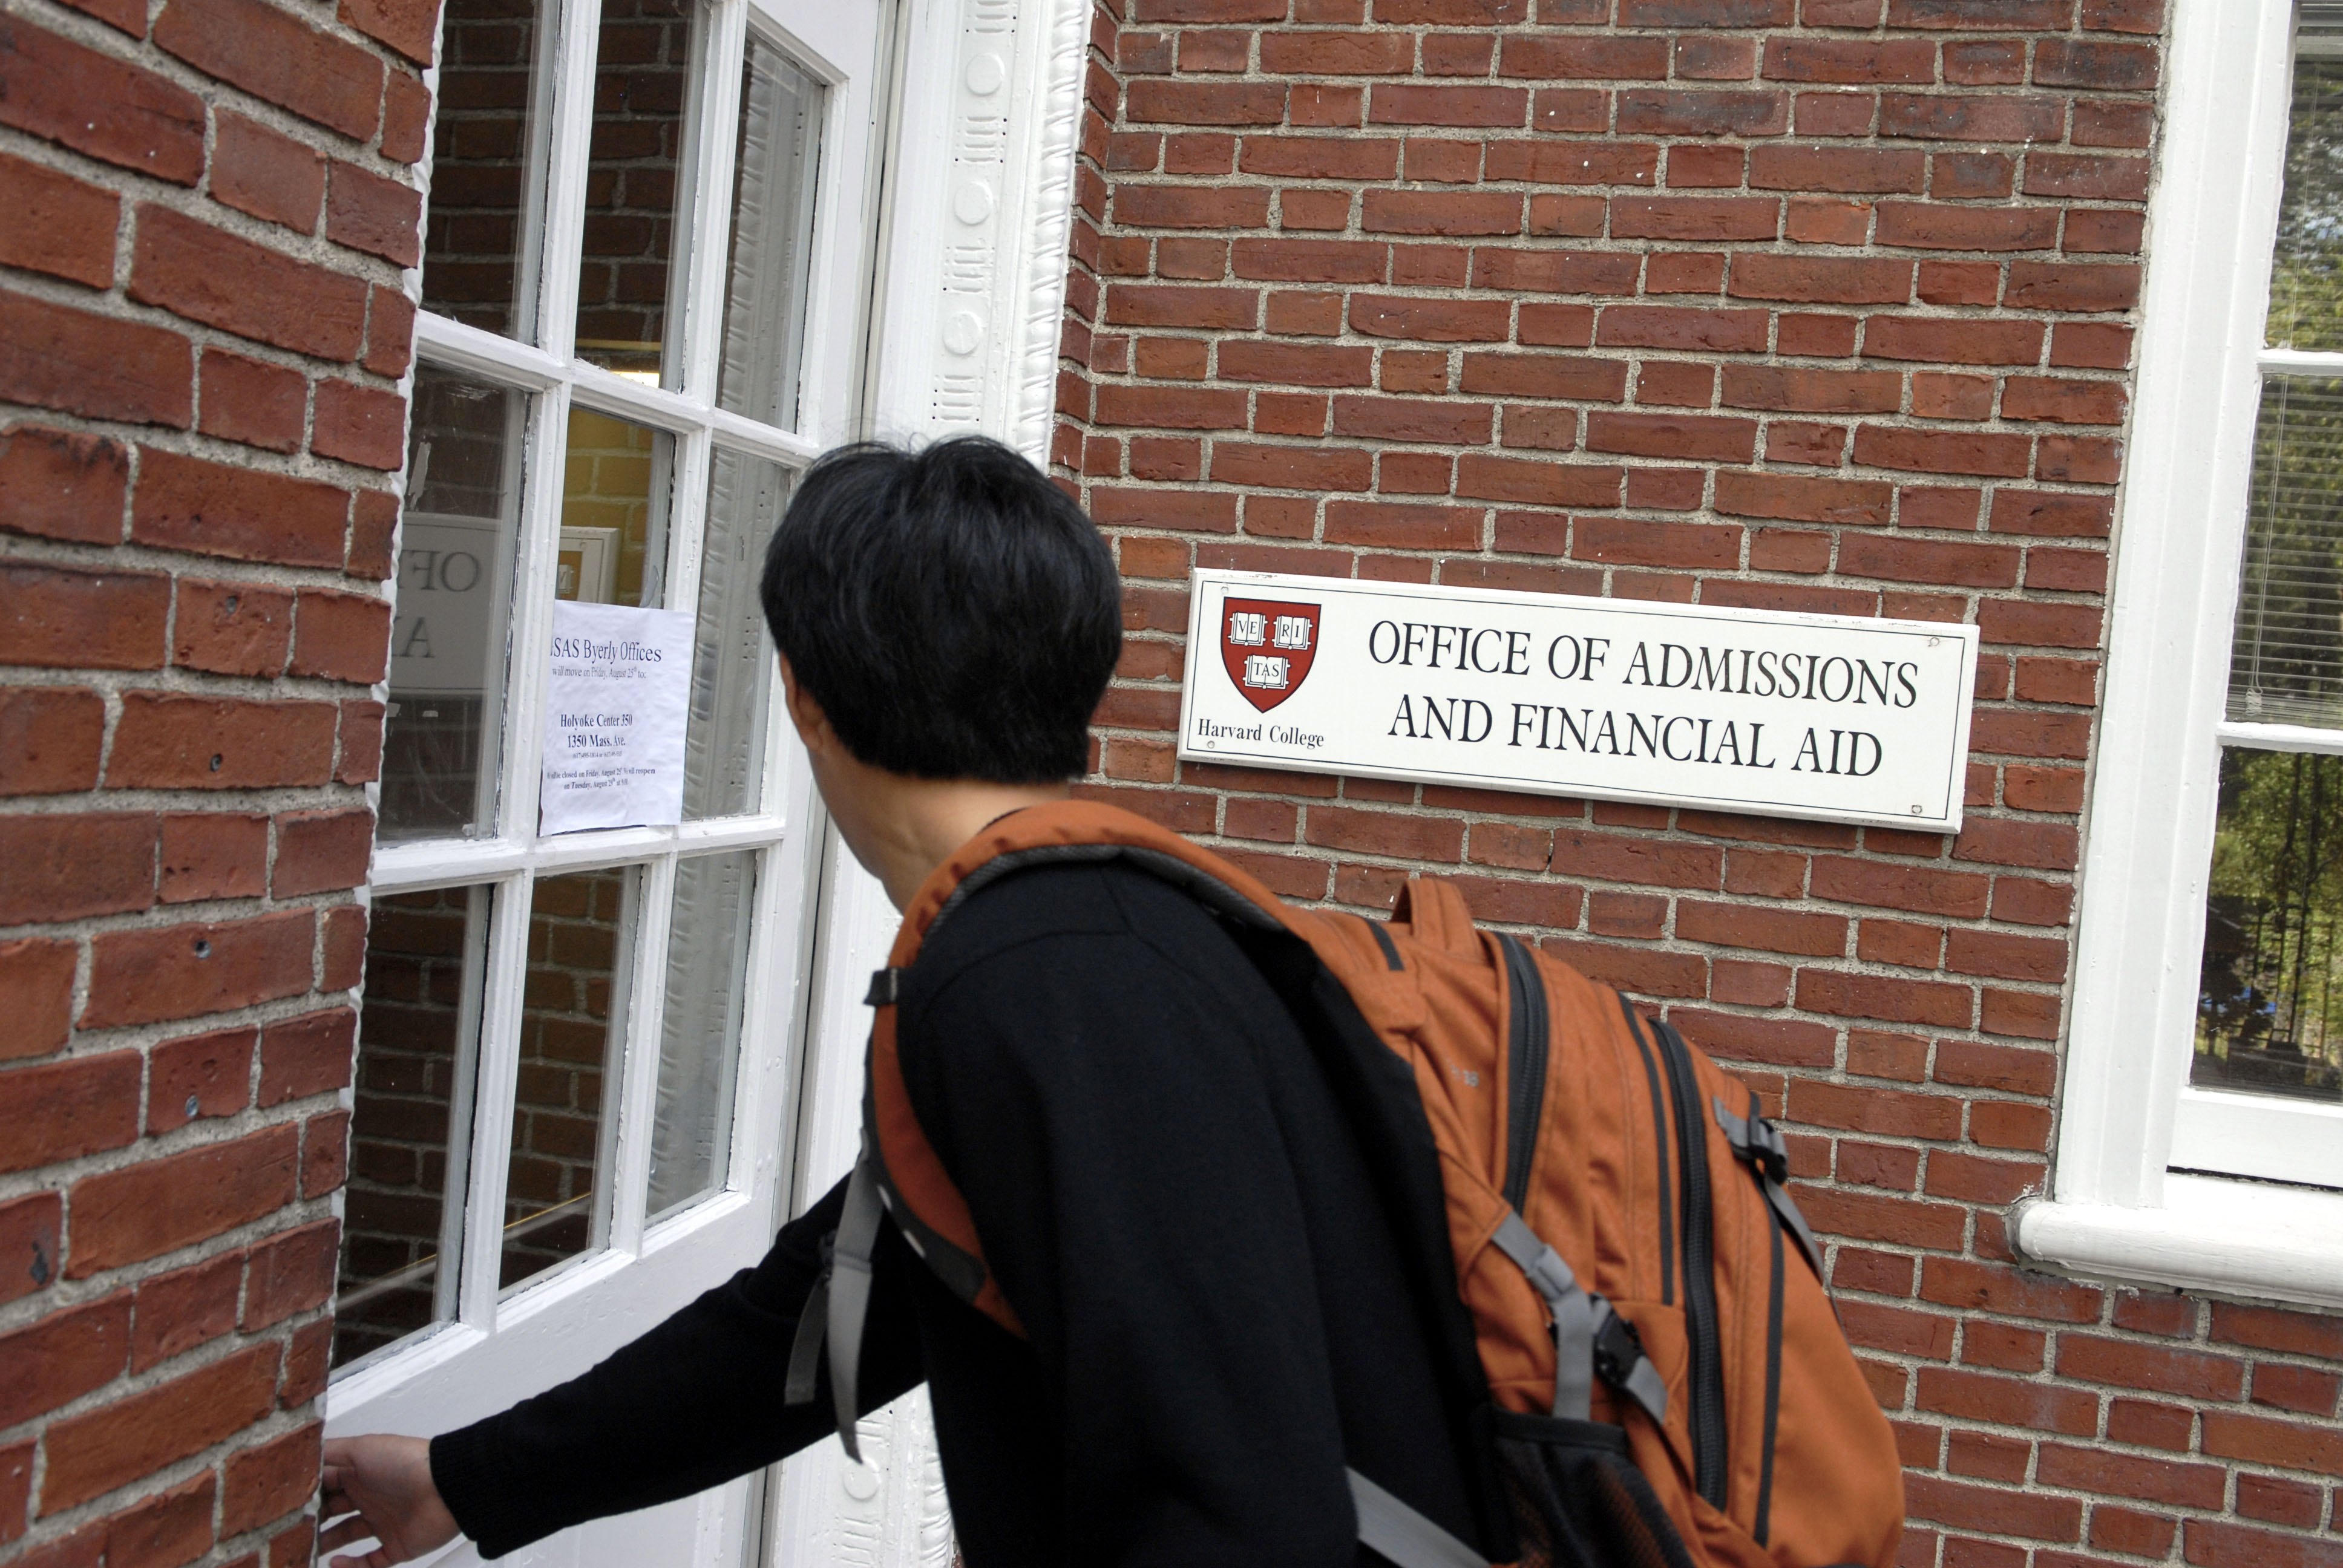 Asian-Americans Sue Harvard for Admissions-Based Discrimination